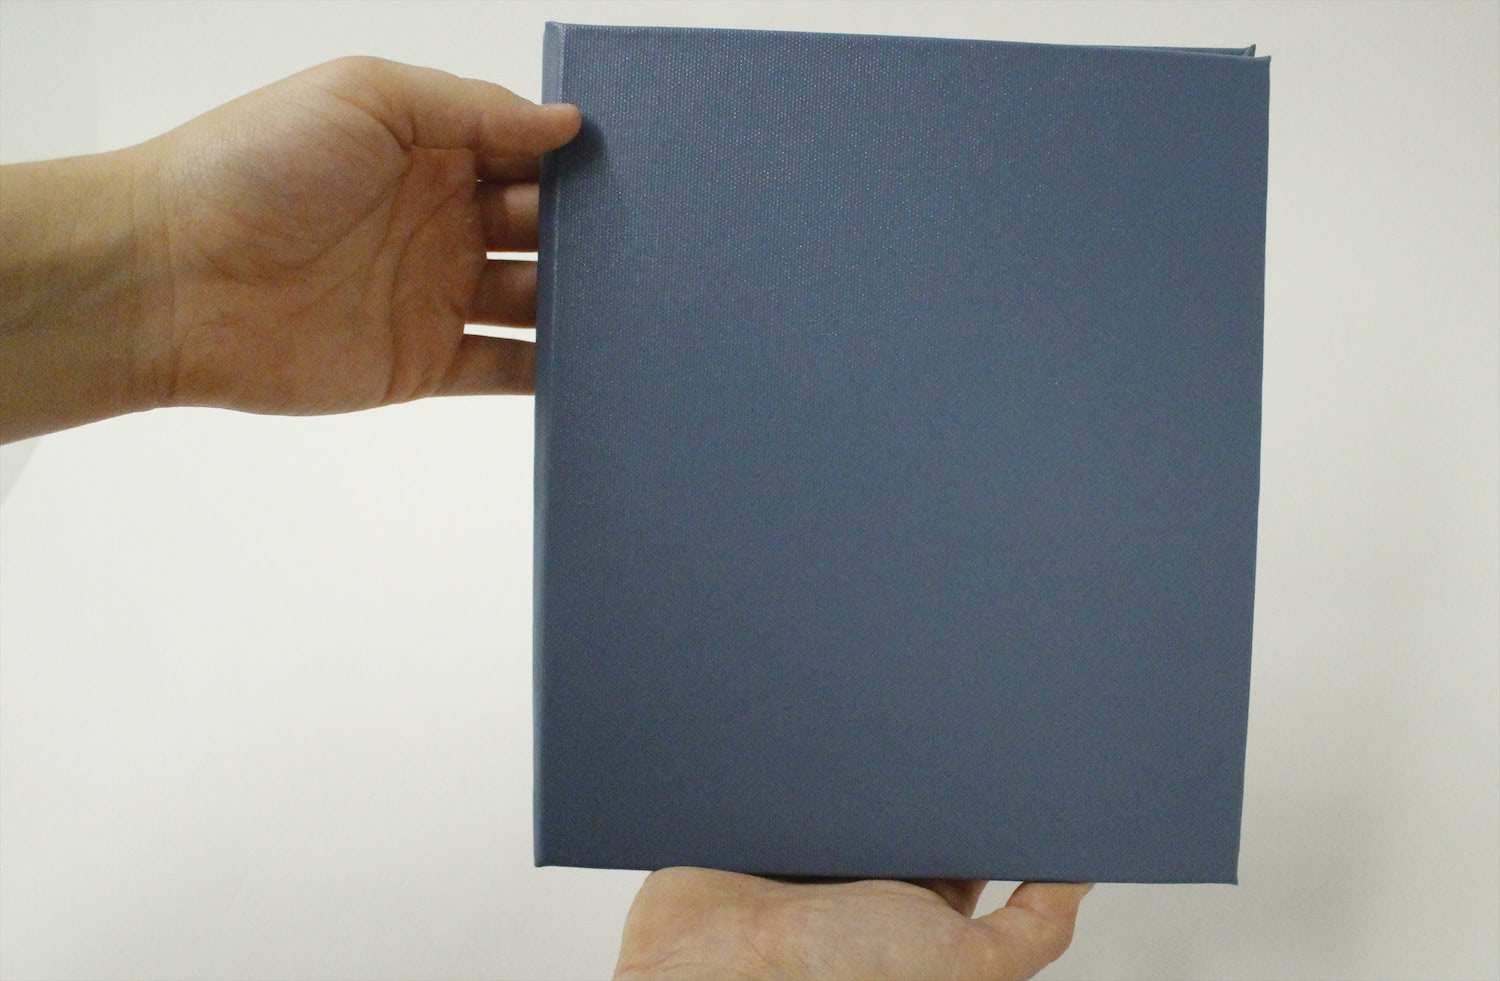 The artist's hands hold a closed self-bound book, showing its blue cover.